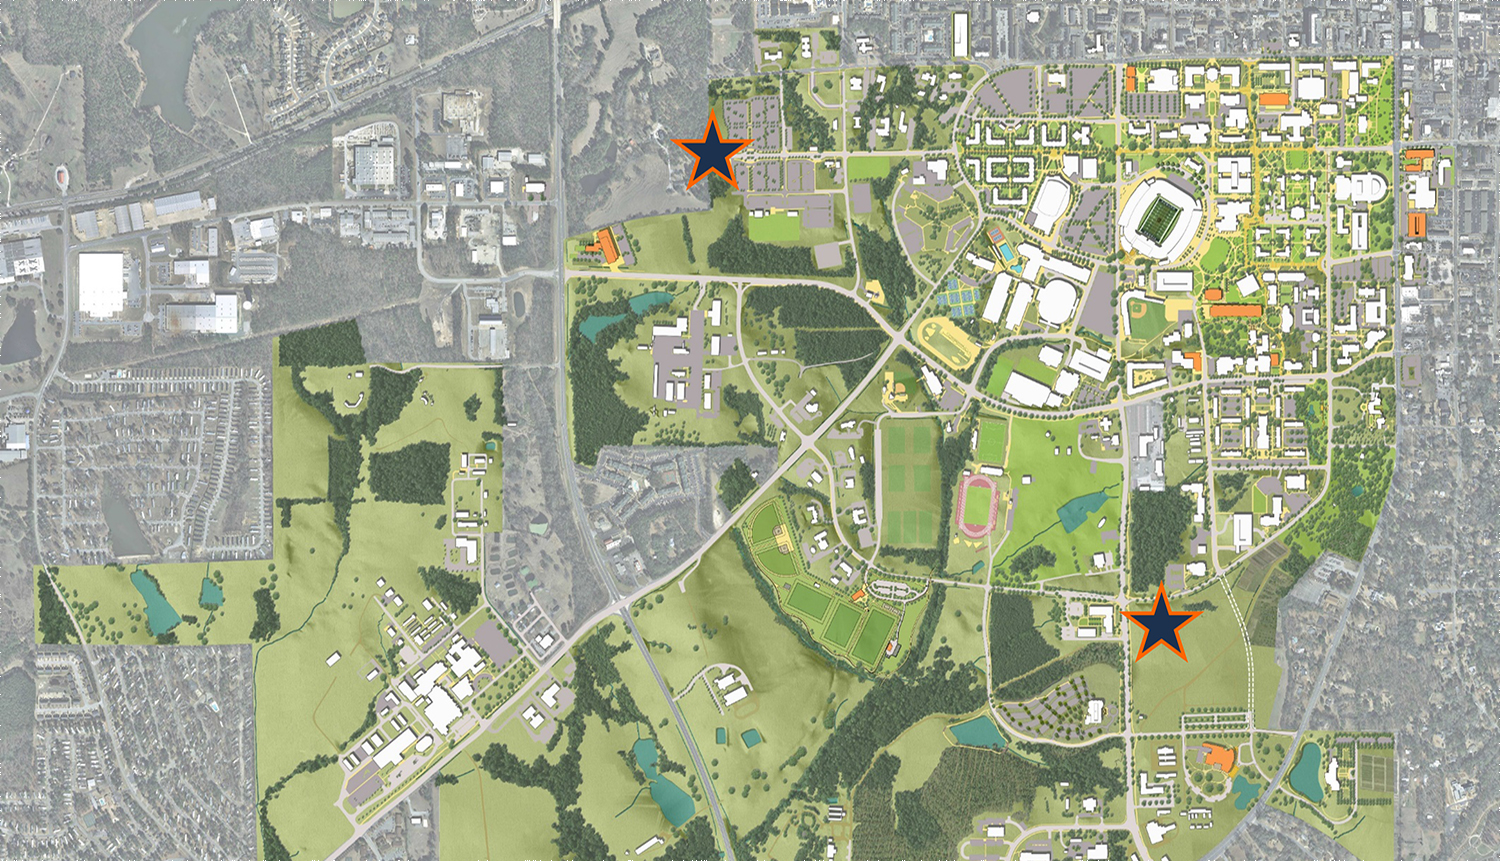 Campus Parking Expansion Phase I